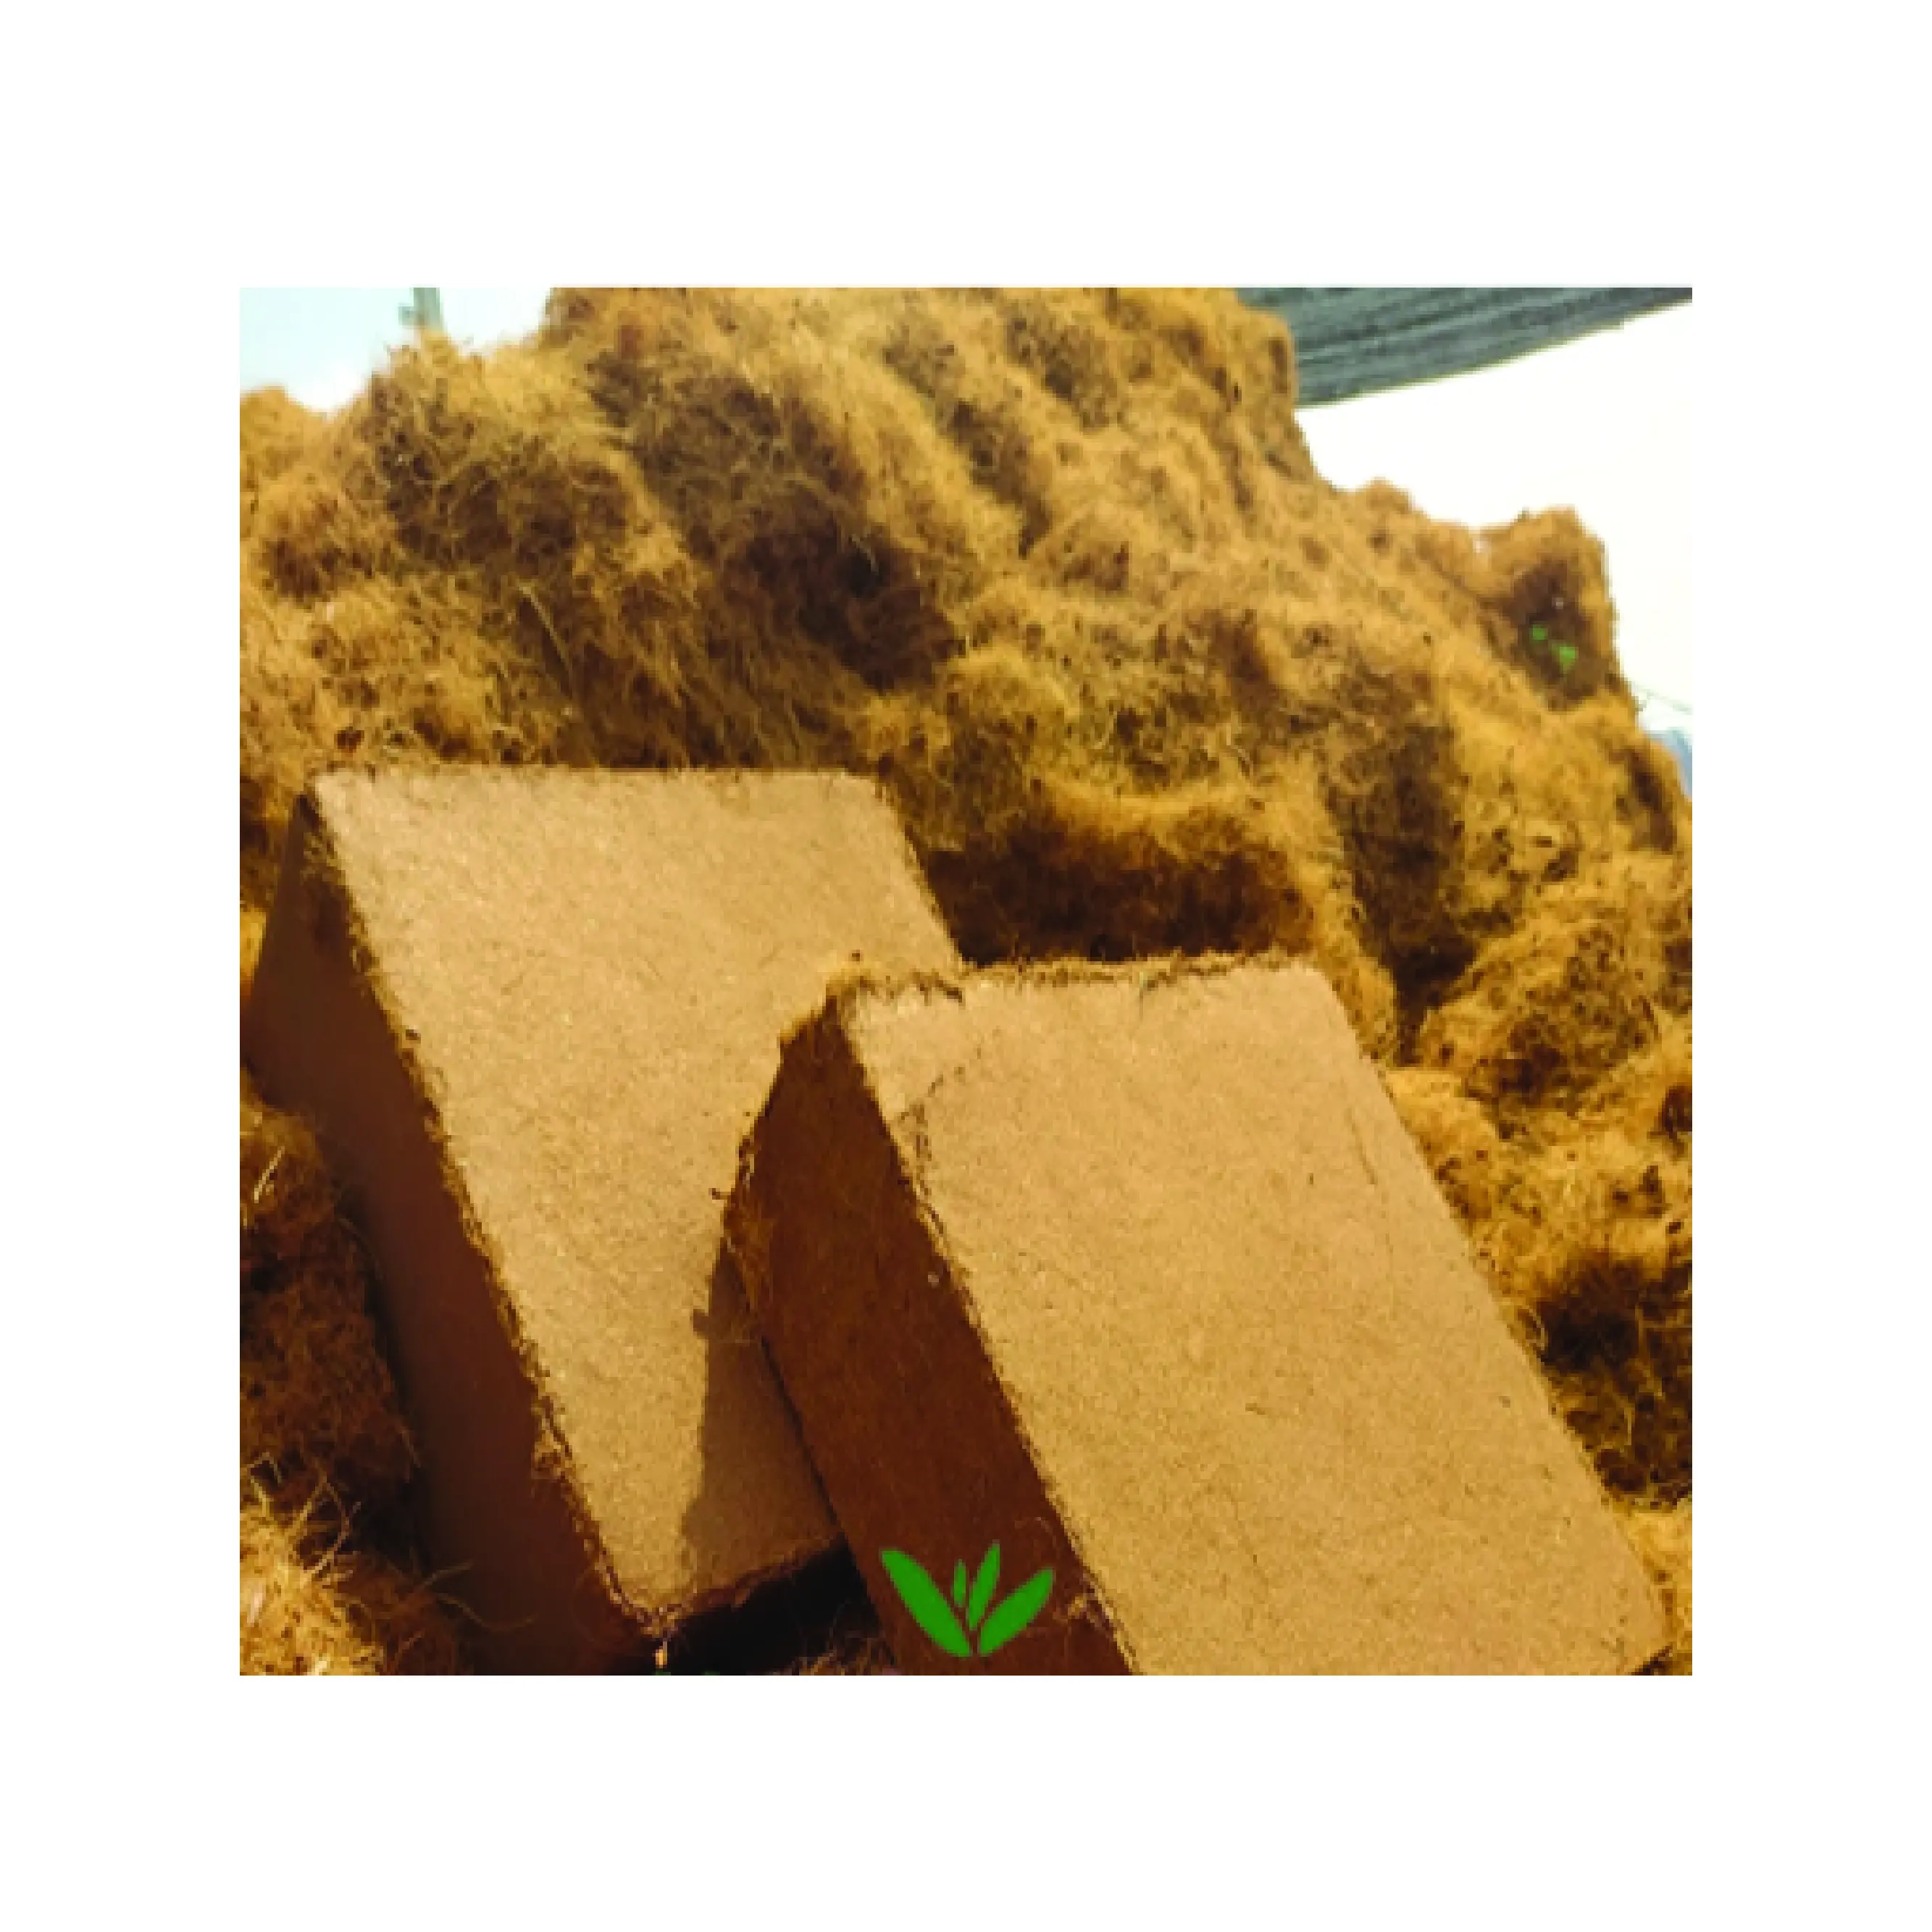 High quality Compressed CocoPeat Block 5Kg - for worm castings - Competitive Price CocoPeat from Vietnam